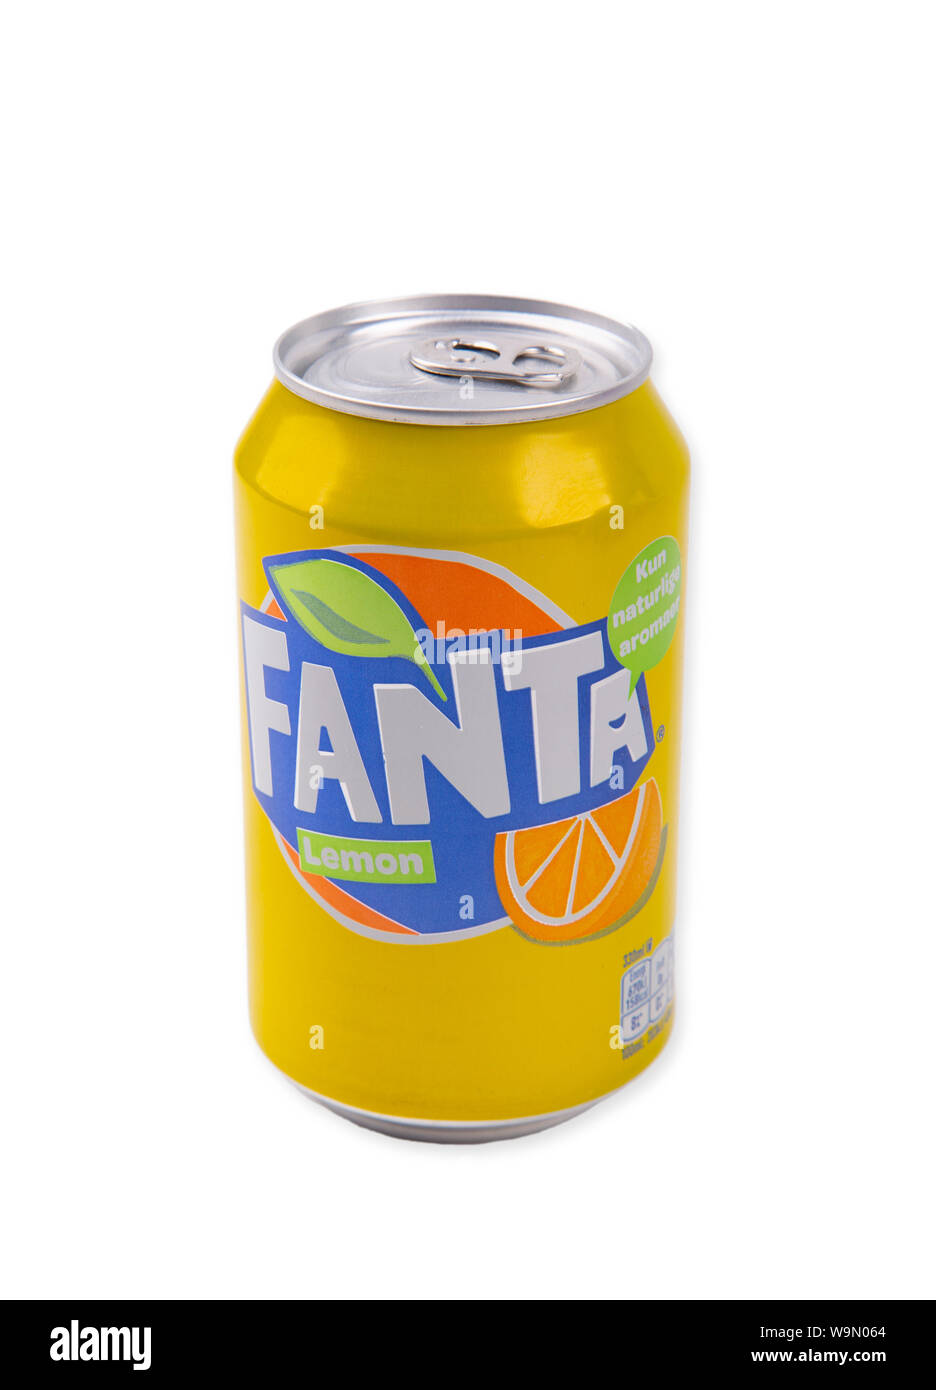 HUETTENBERG, GERMANY AUGUST 13, 2019 Strawberry and Kiwi Fanta can on white background. Fanta is popular fruit-flavored carbonated soft drink created Stock Photo